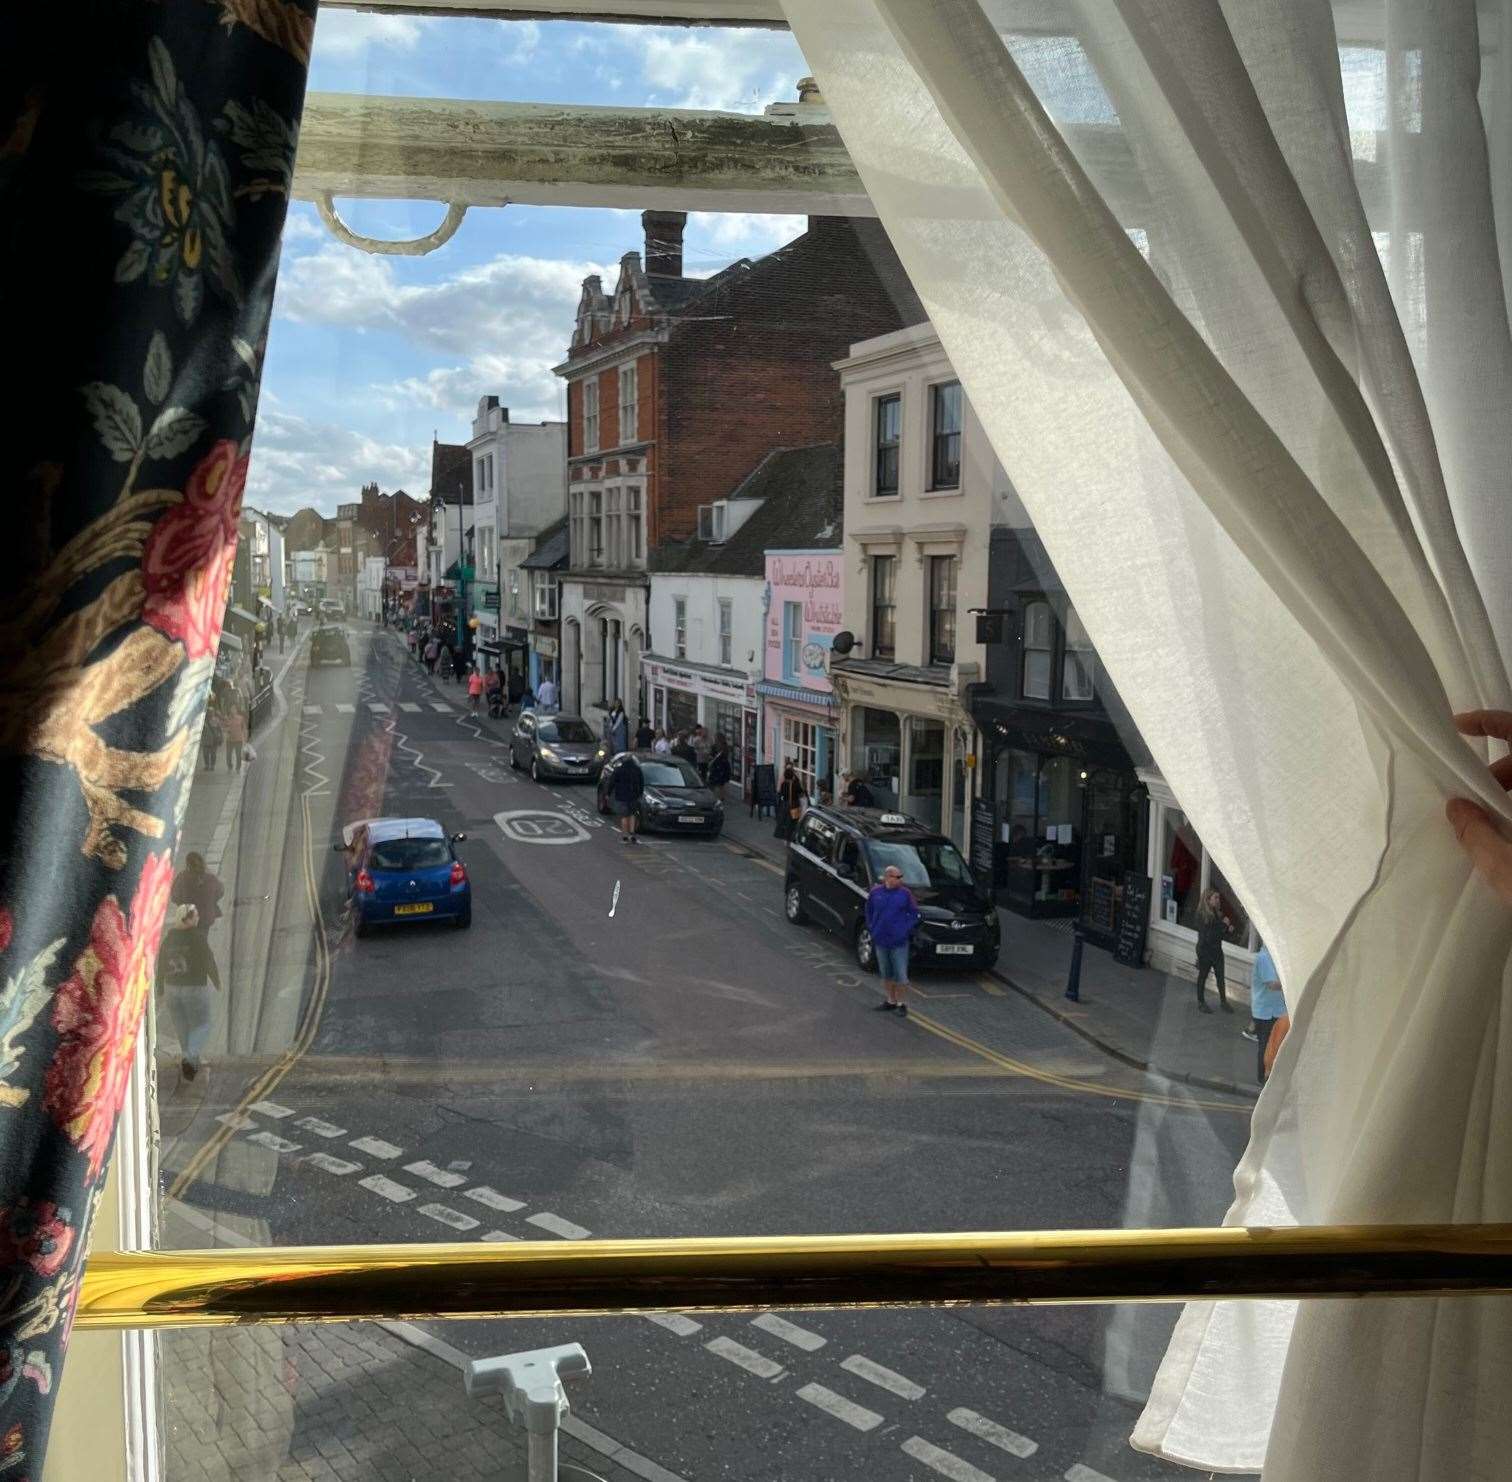 The view of Whitstable High Street from The Gamecock room at the Duke of Cumberland